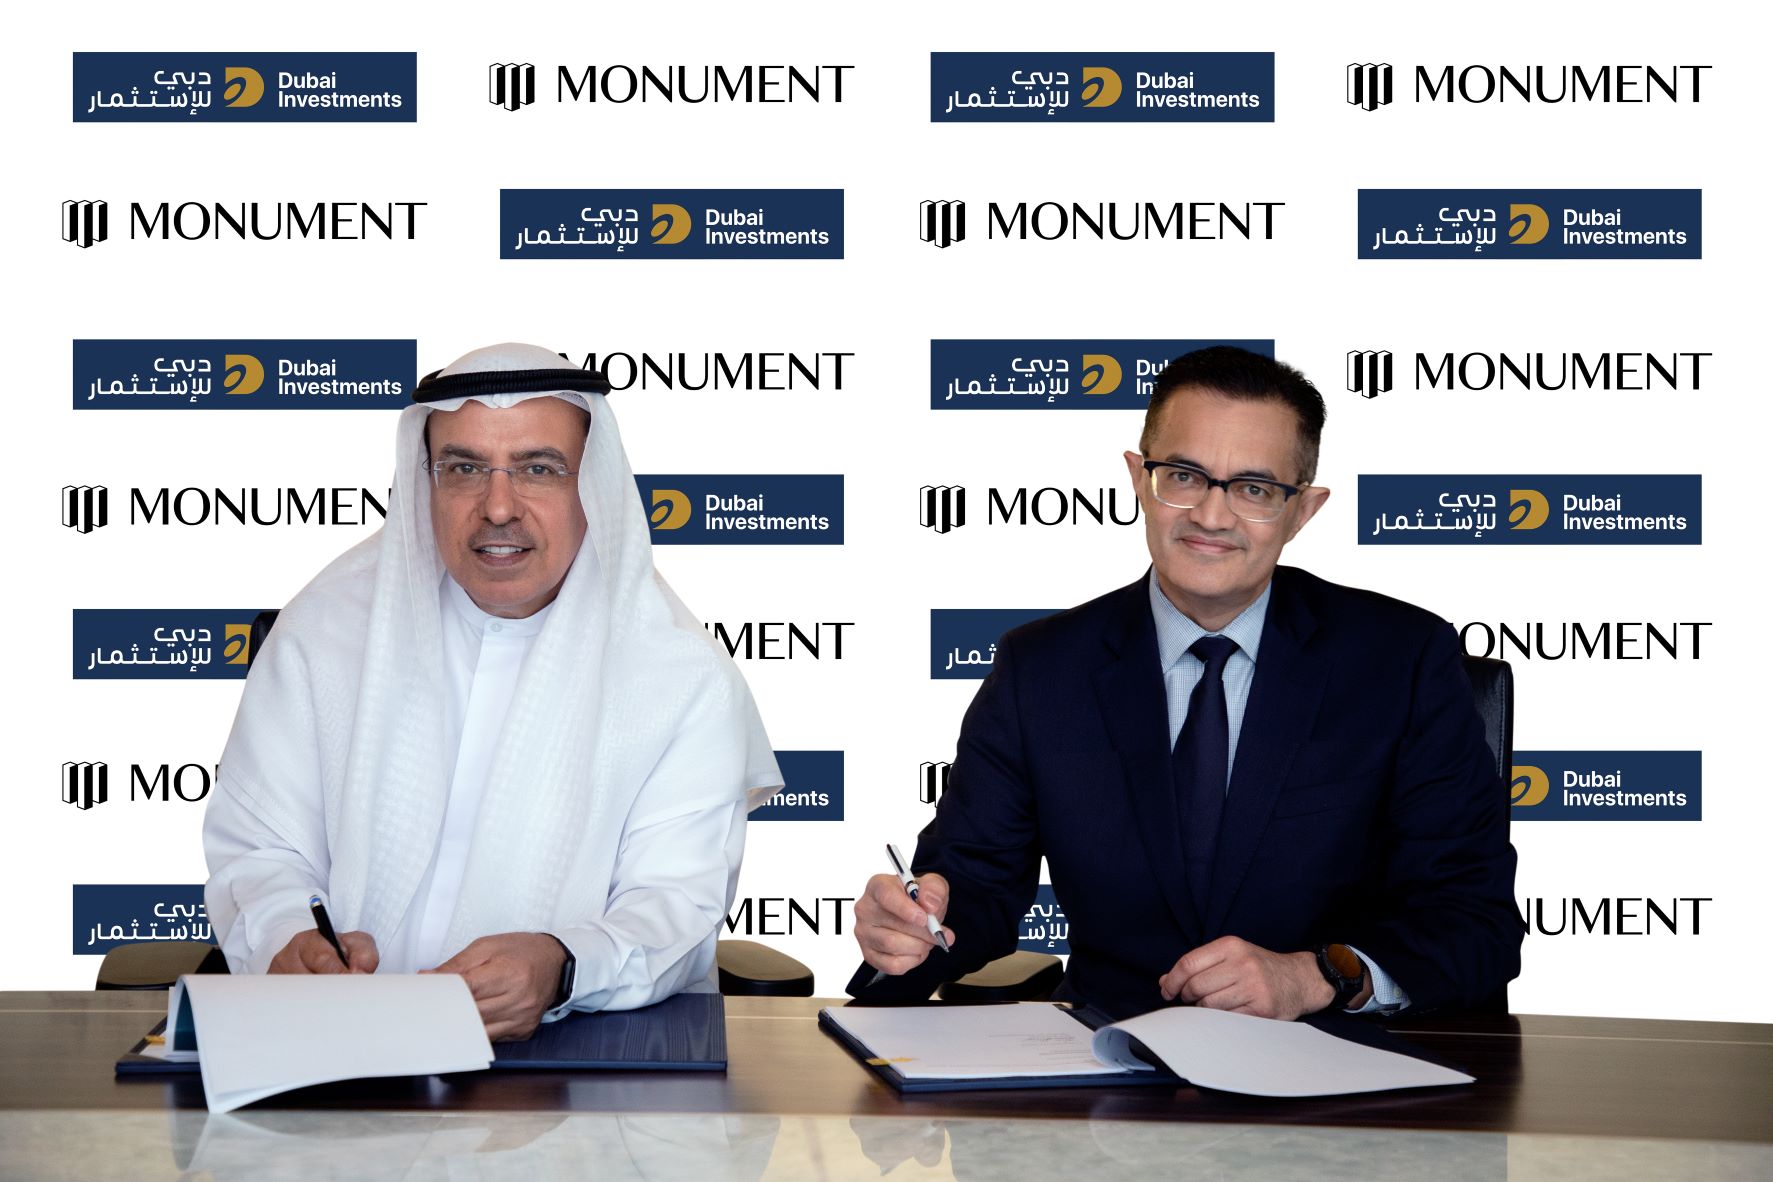 Dubai Investments Acquires Stake in Monument Bank, UK based Digital Bank